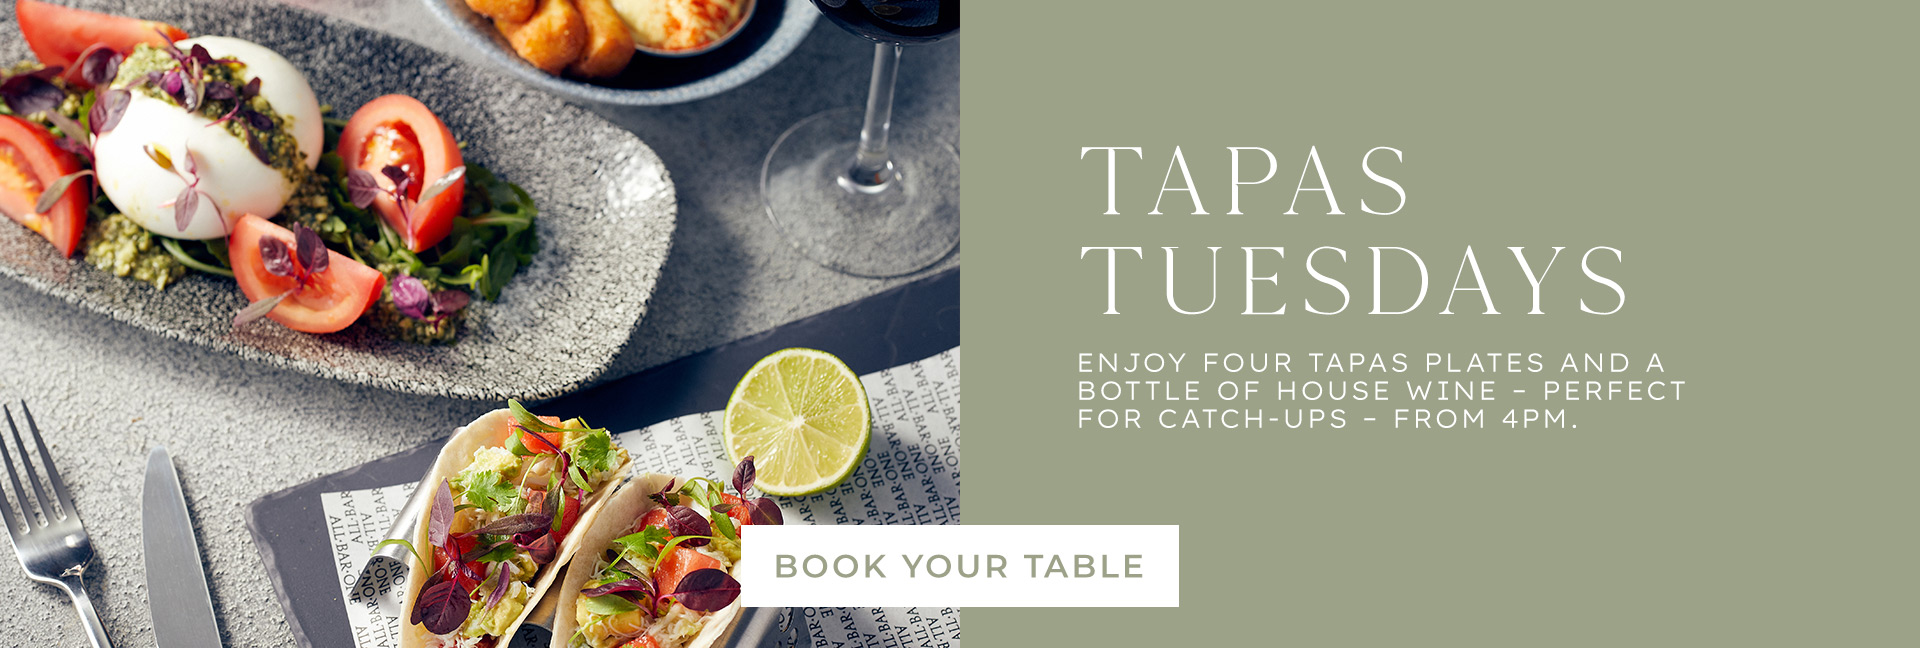 Tapas Tuesday at All Bar One Newcastle - Book now